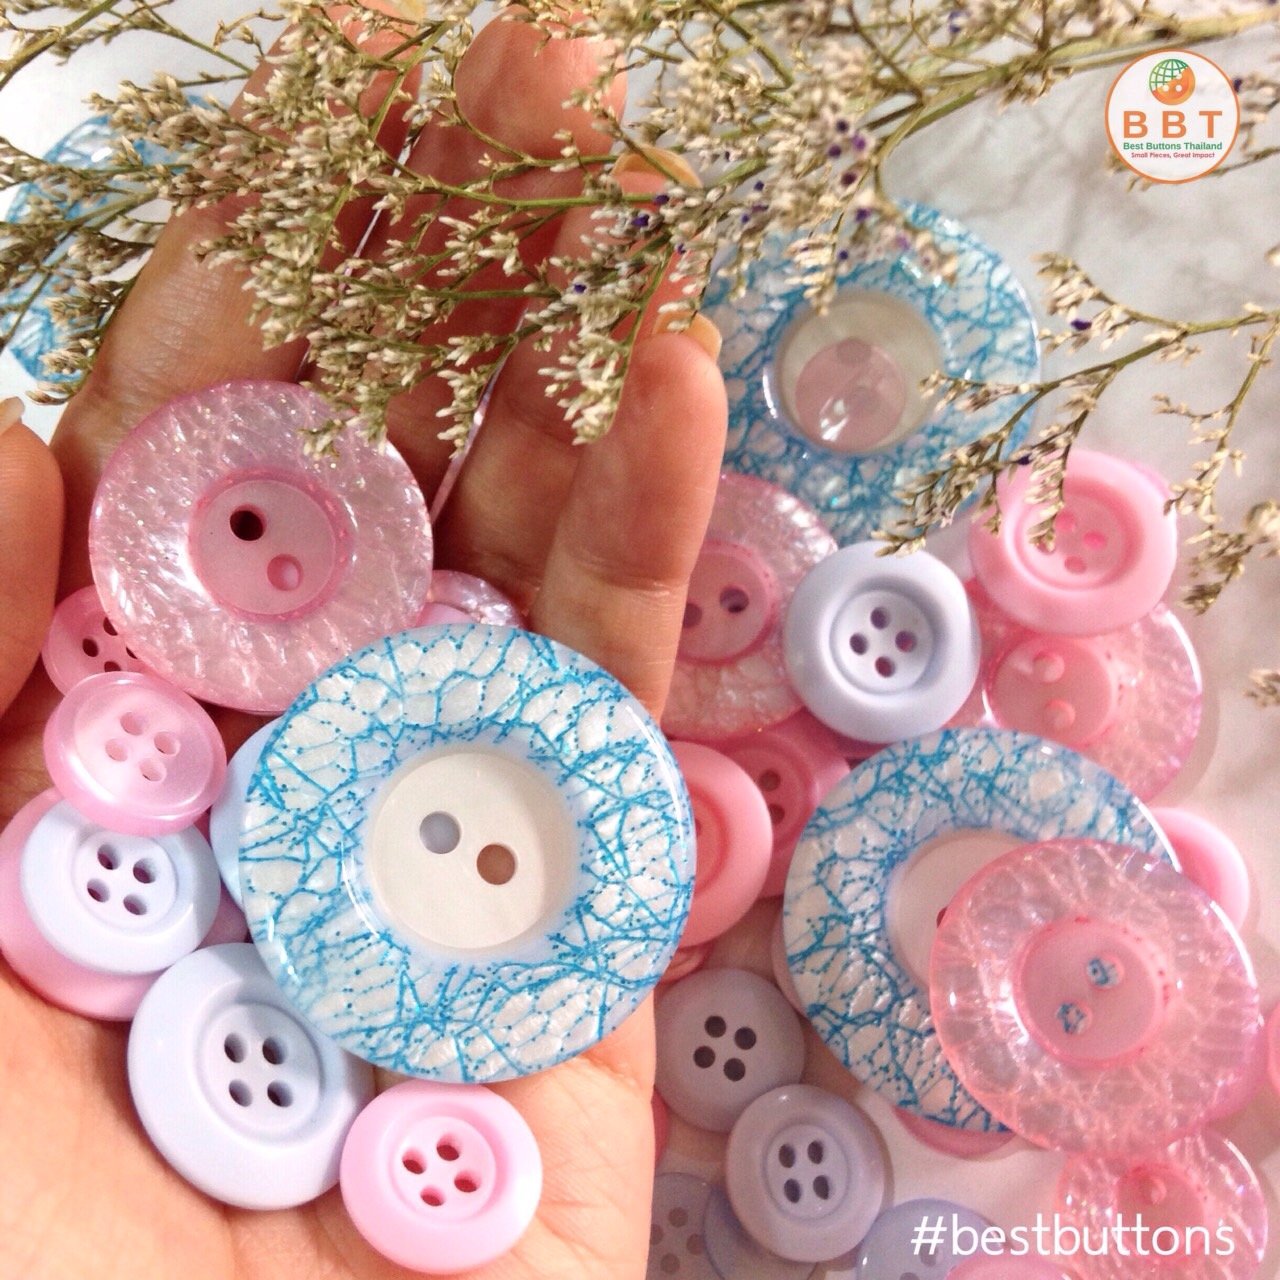 Beauty of Buttons